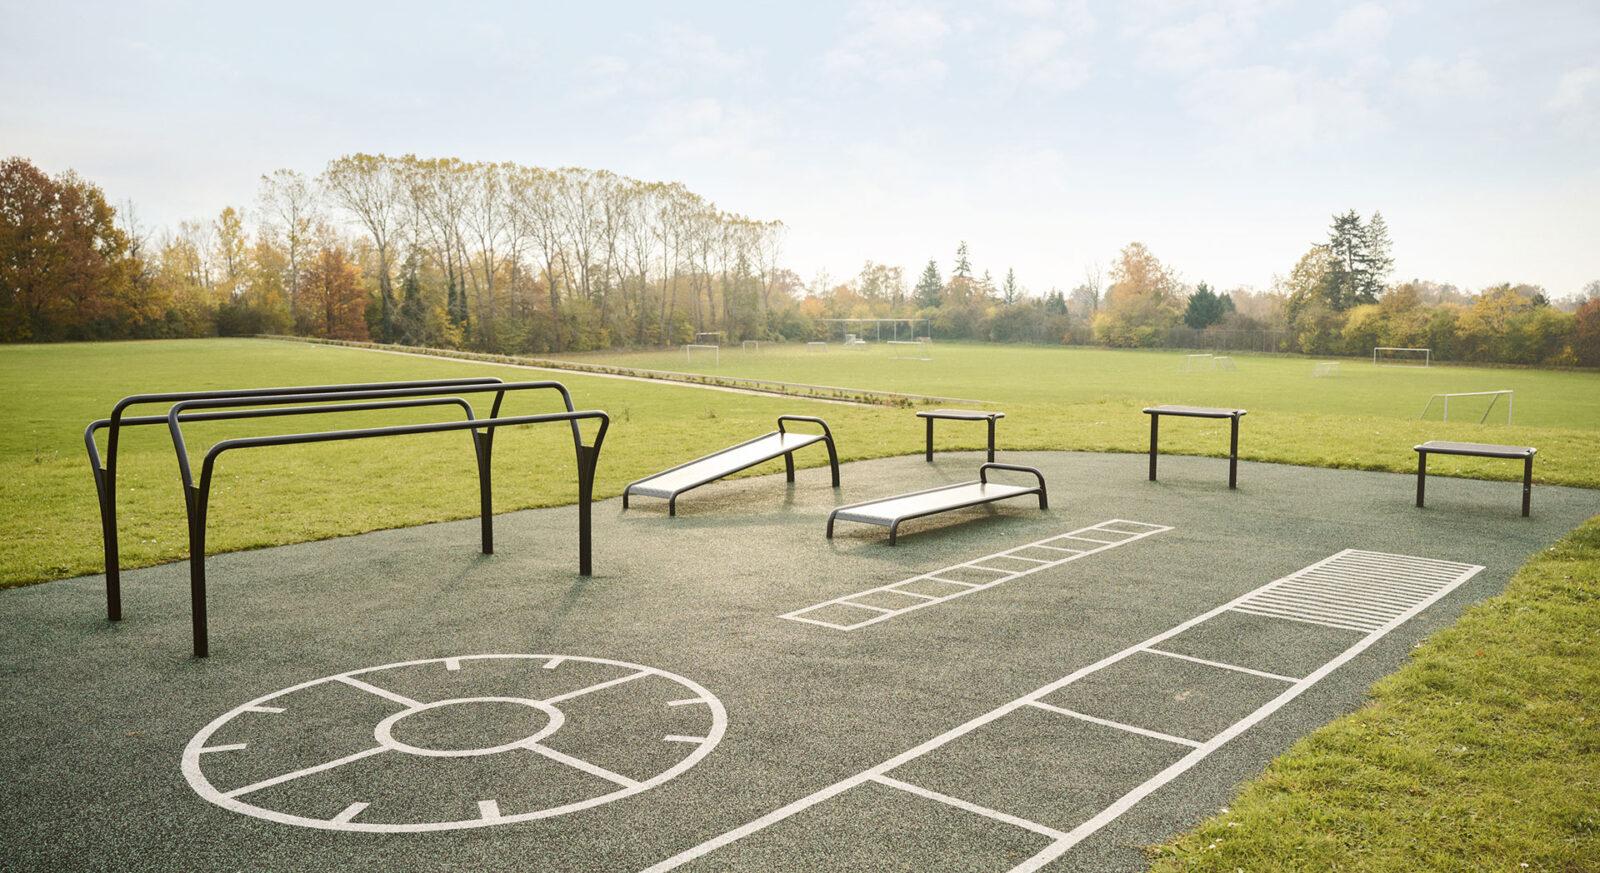 Public area with fitness equipment. Ideas and inspiration of a danish designed project.